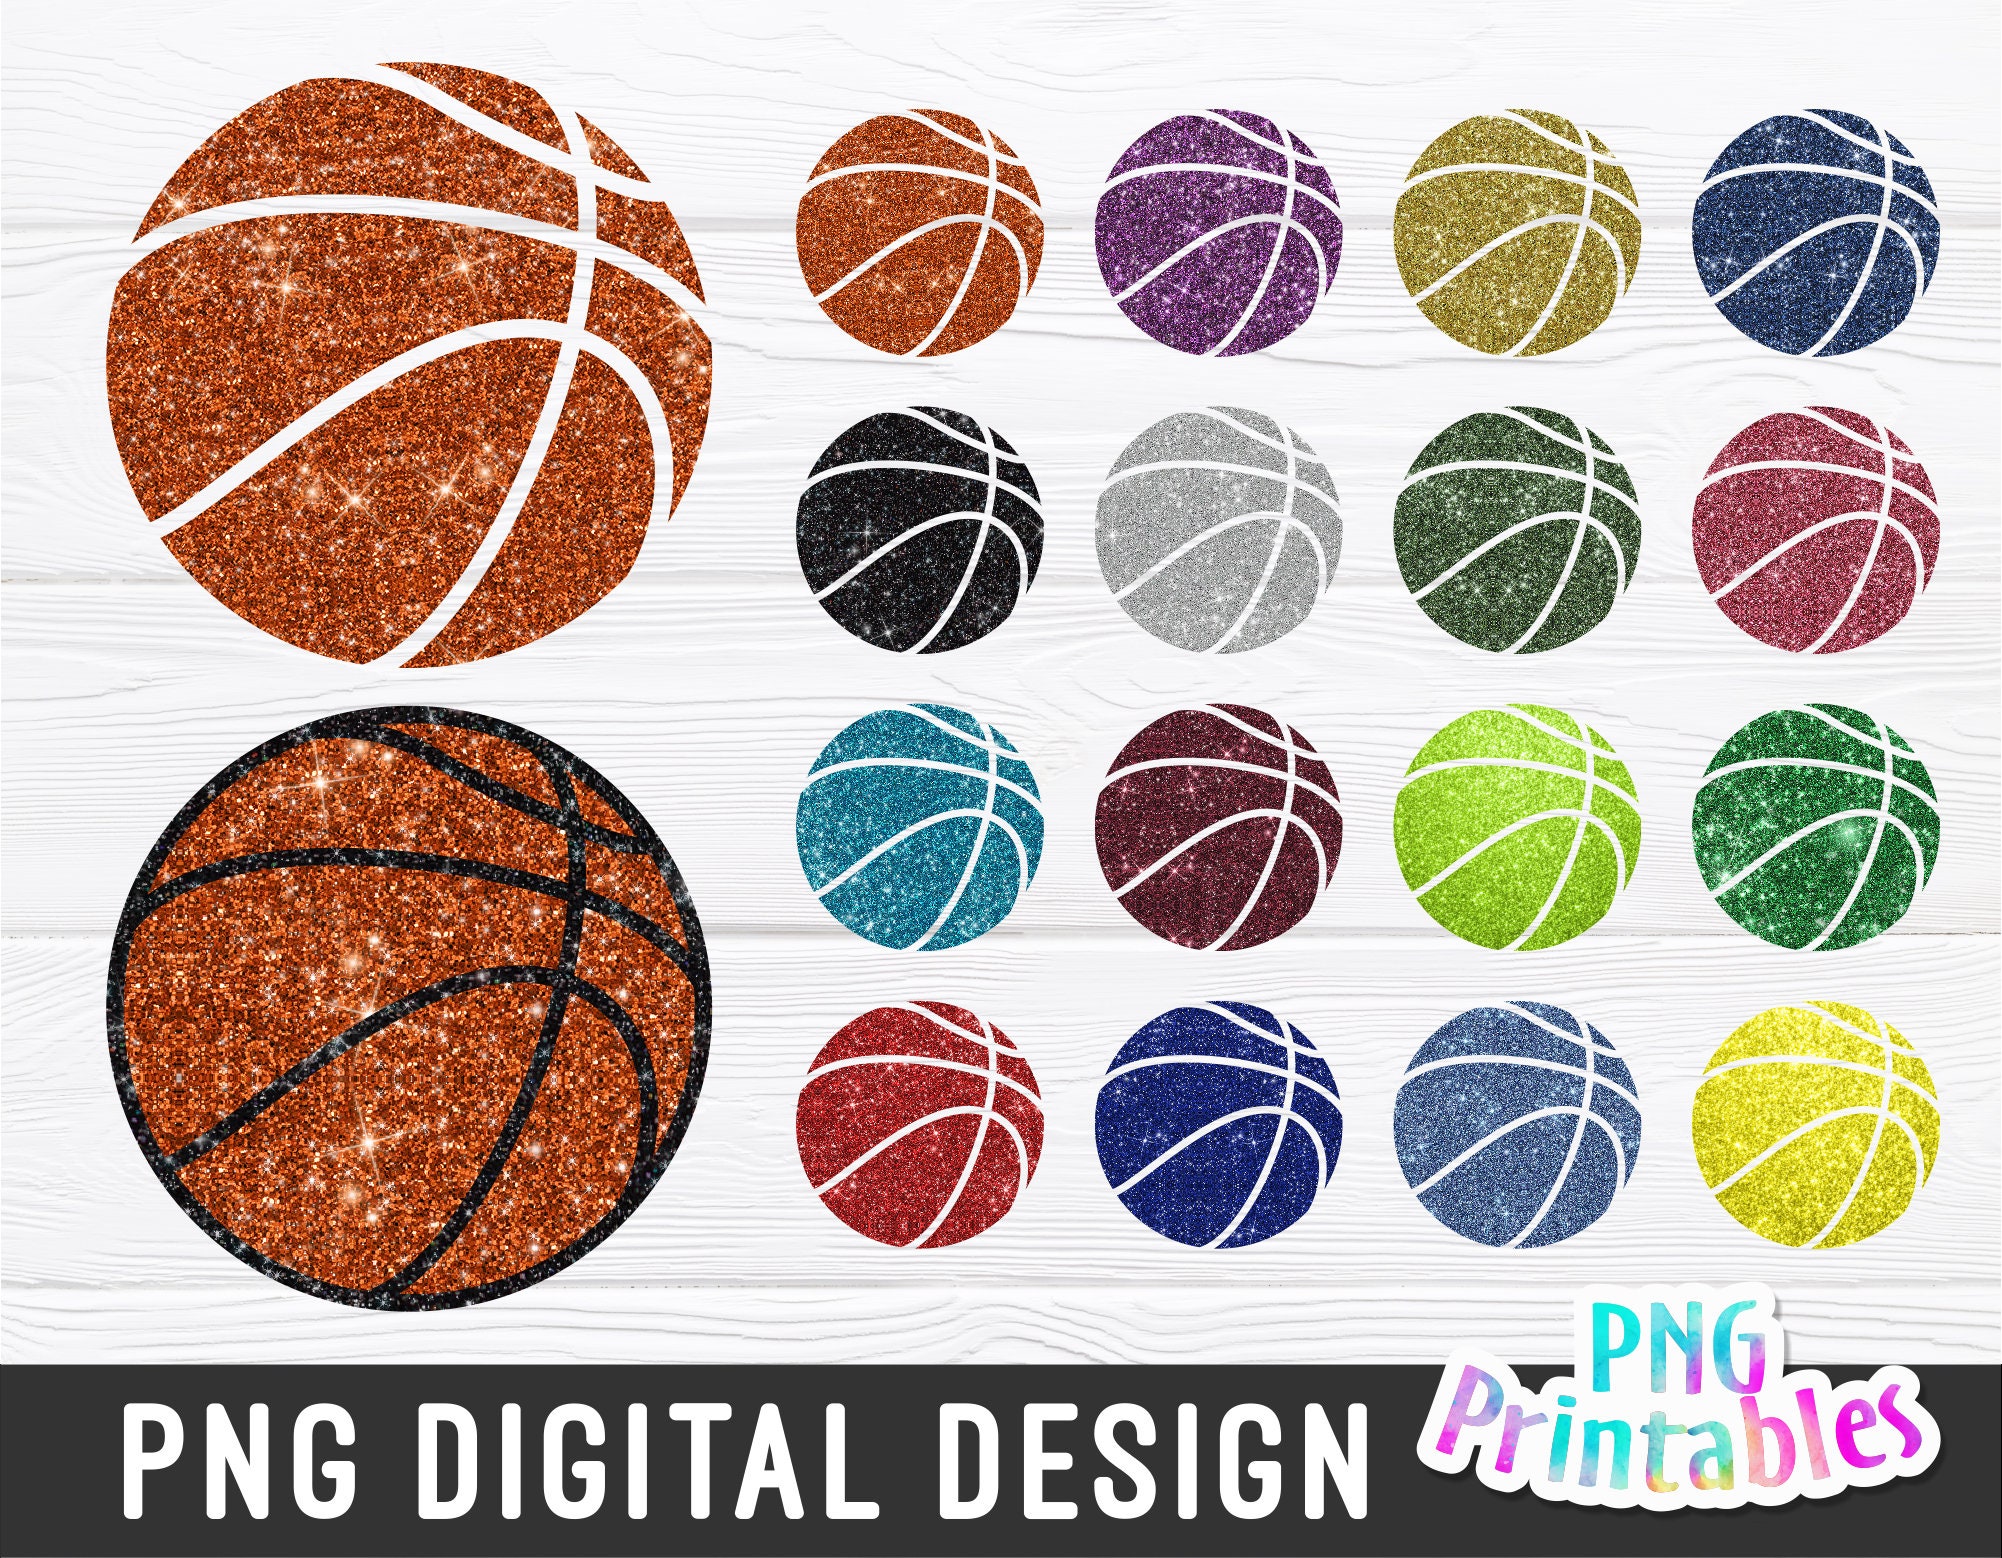 Impin The Rim Love And Basketball Basketball Art - Gold Chain Basketball  Net PNG Image With Transparent Background